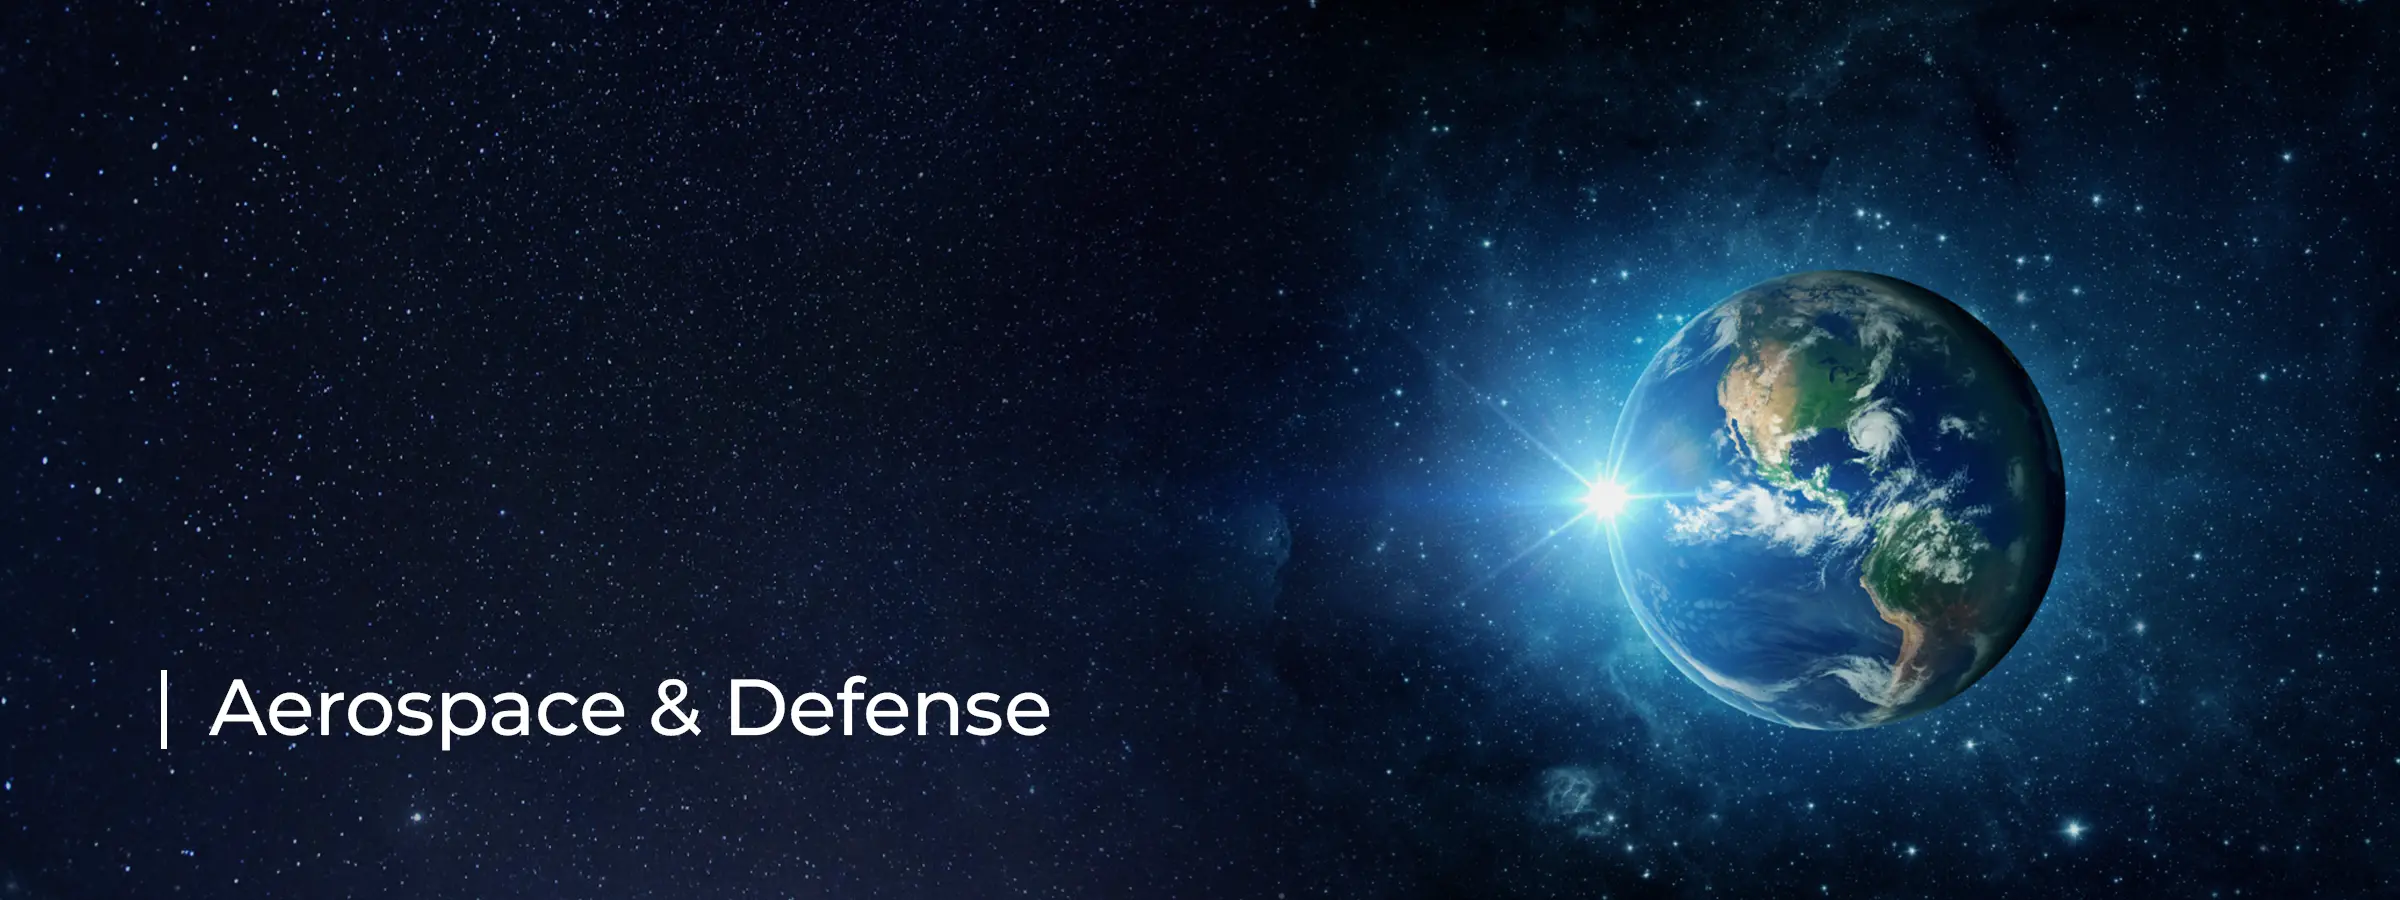 aerospace-and-defense-banner